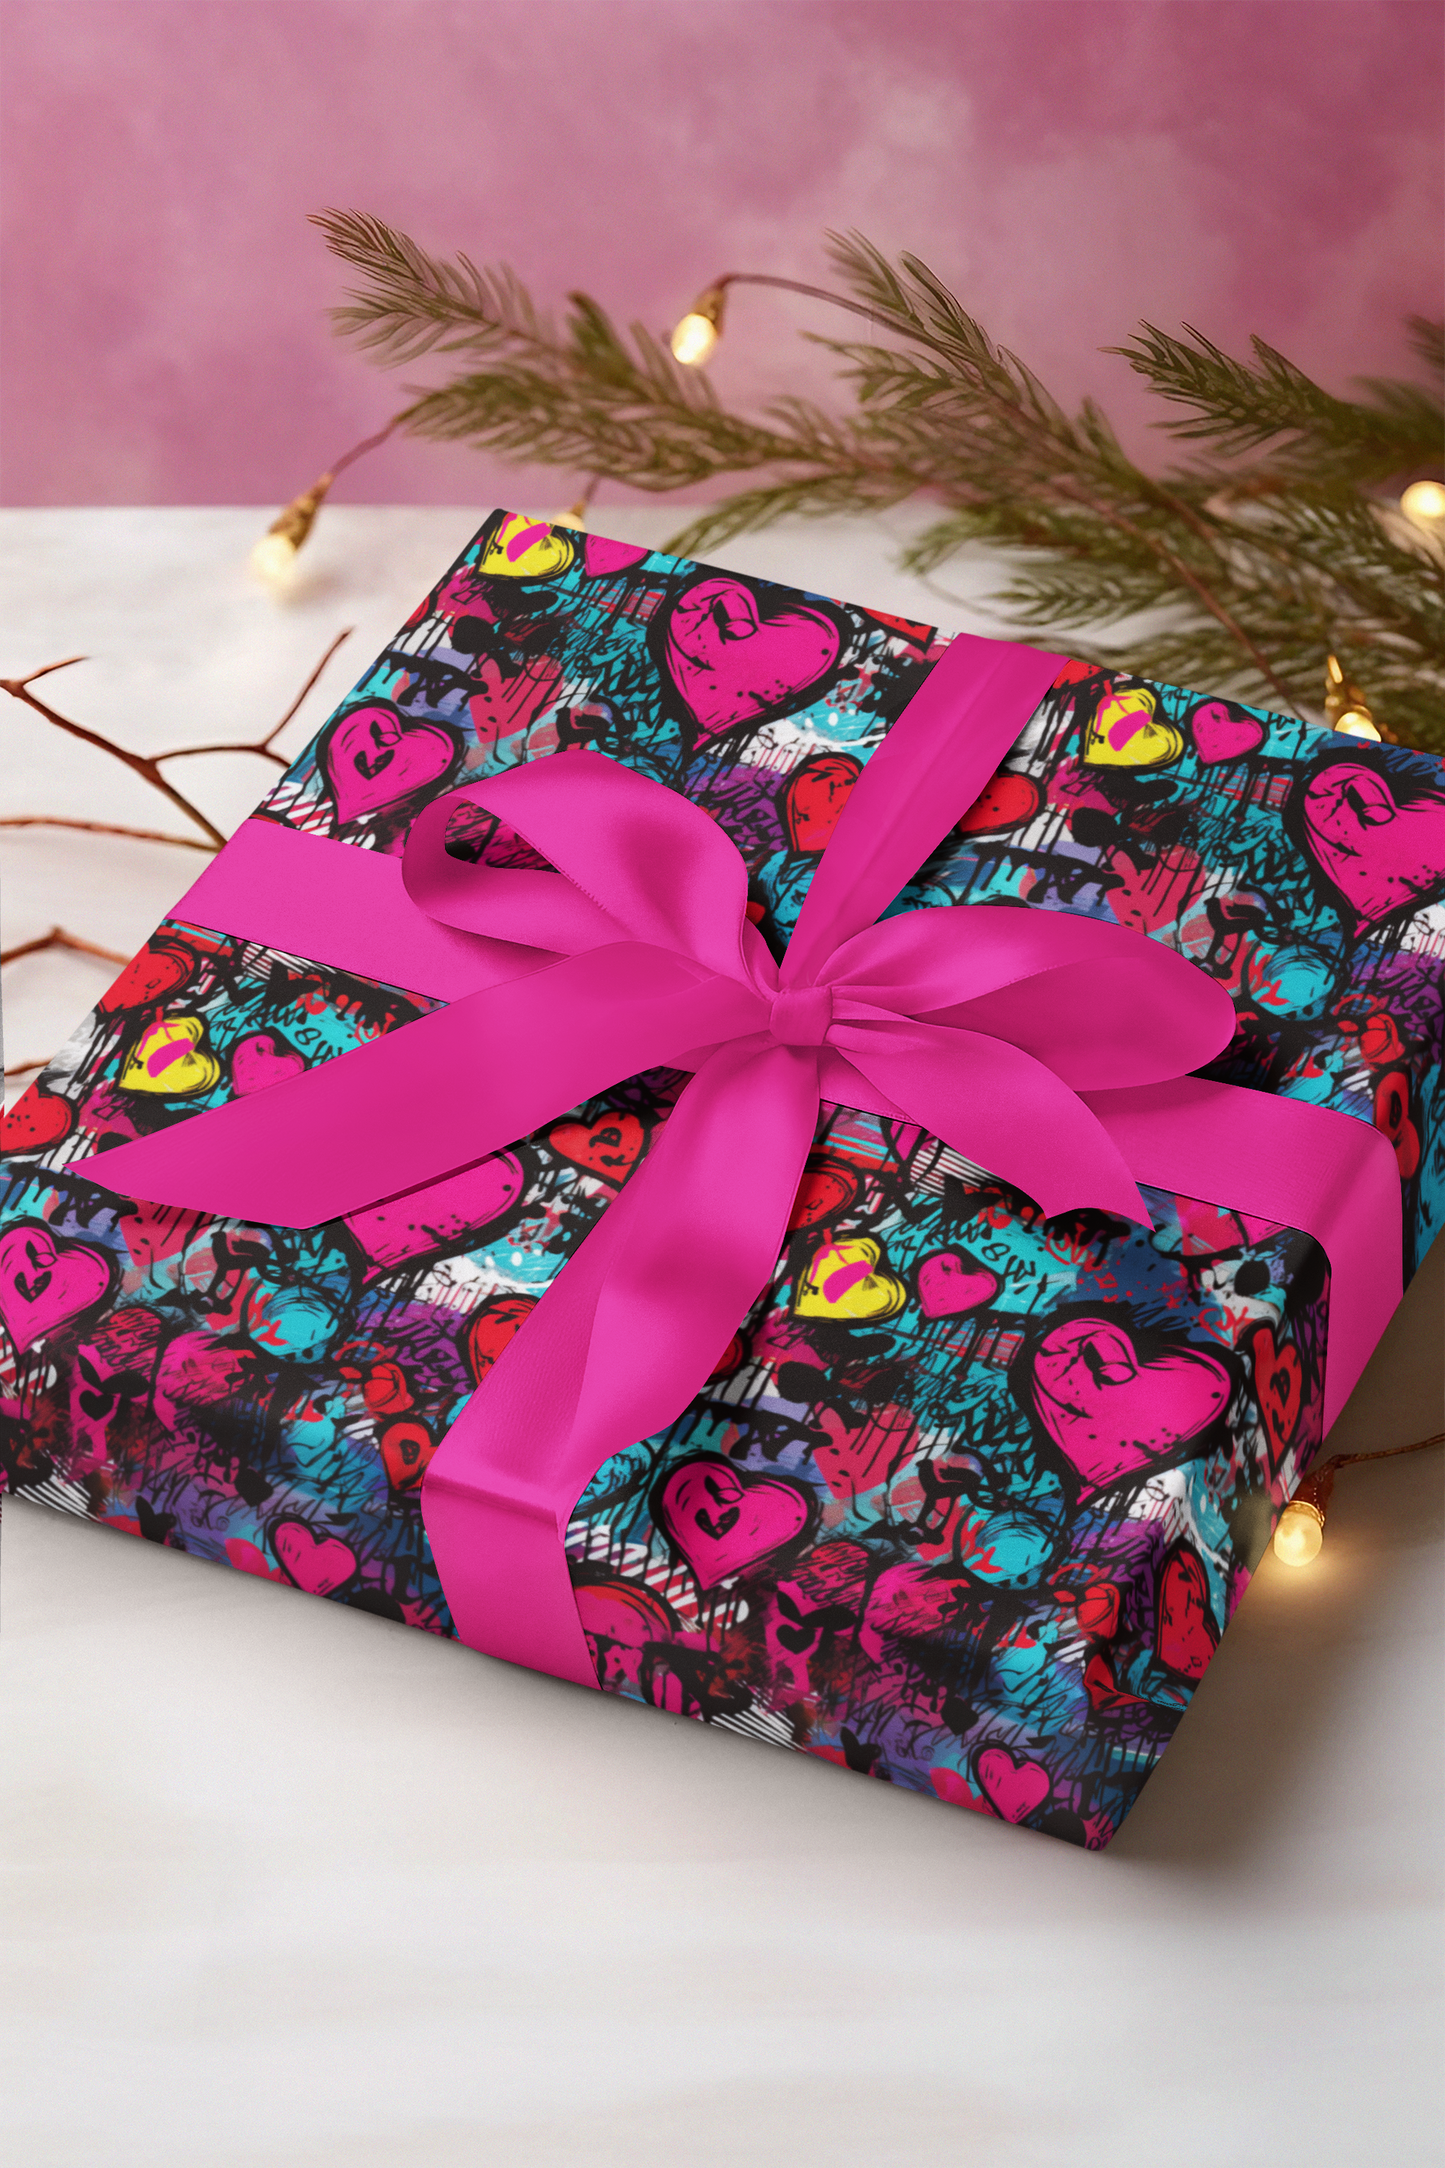 Retro Hearts Valentines Day Wrapping Paper